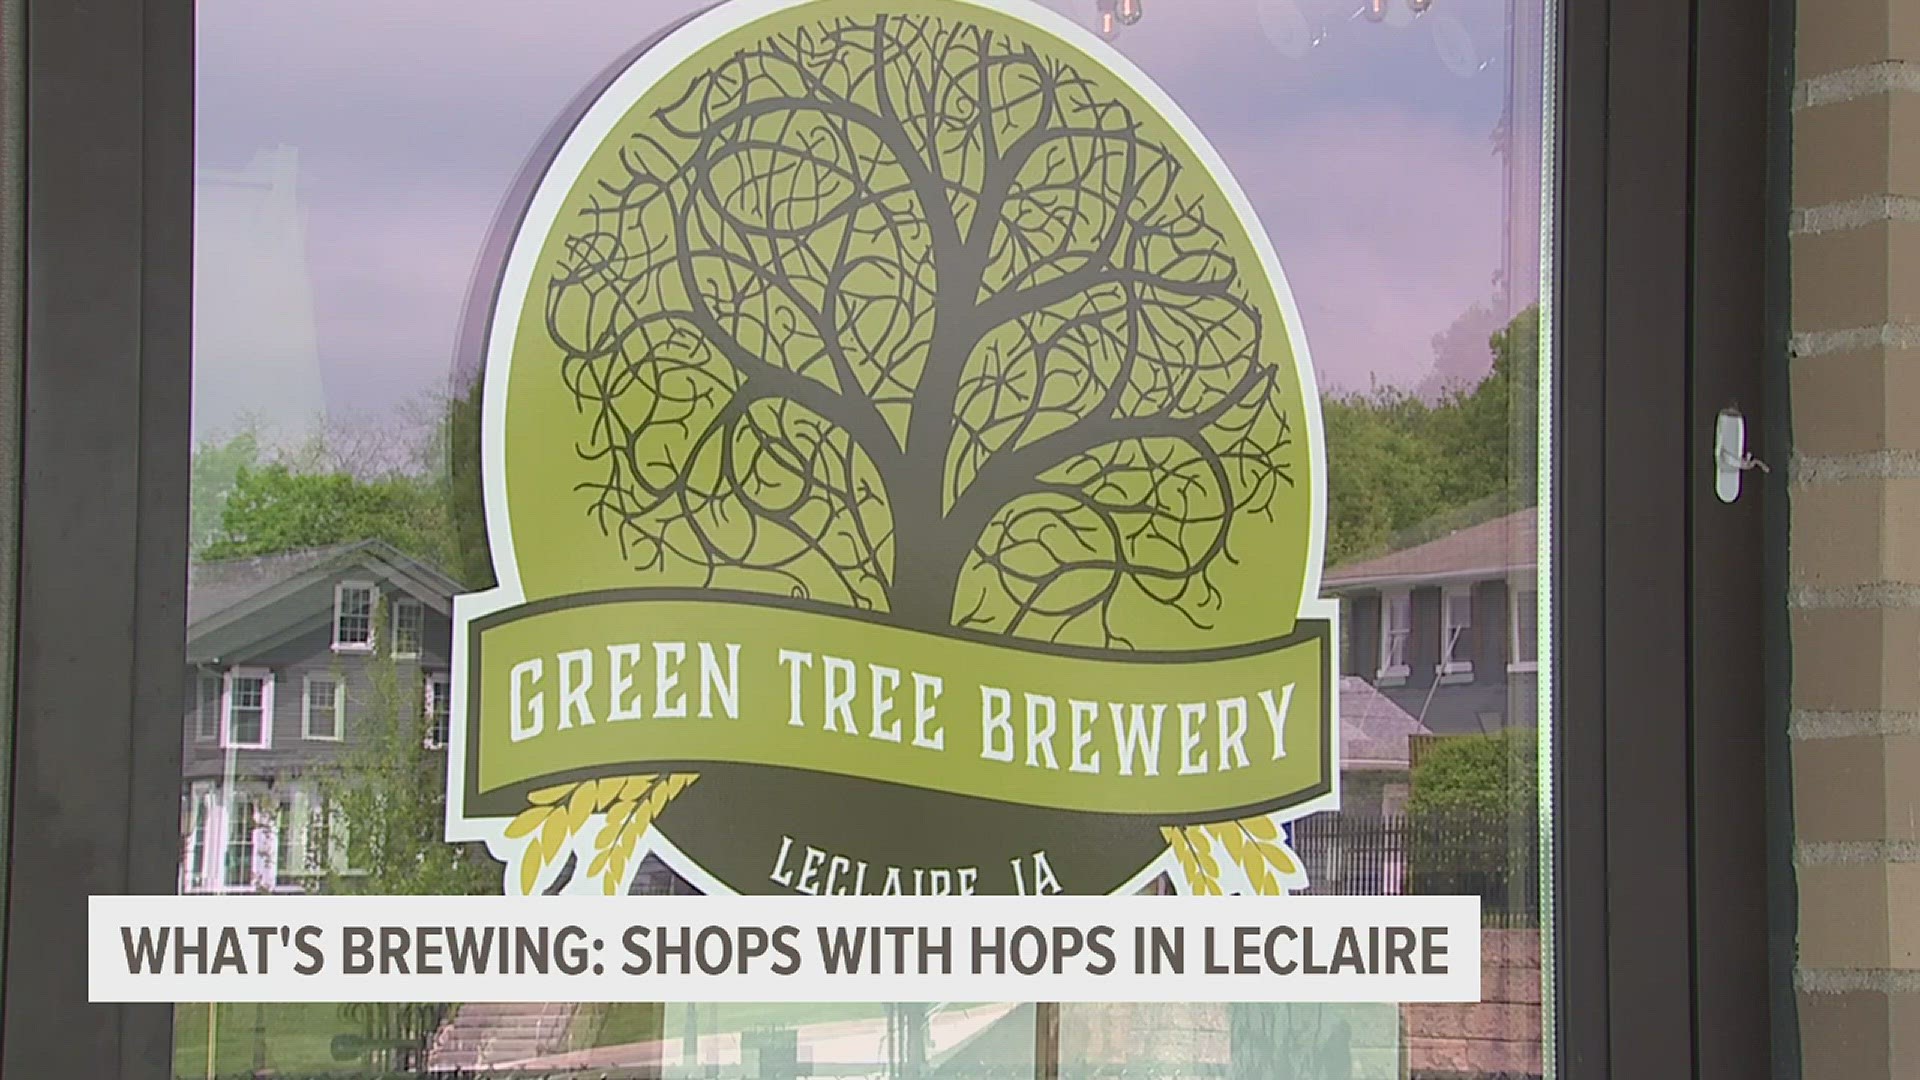 Come do Shops with Hops at Green Tree Brewery in Le Claire! They're releasing a new beer during the event!